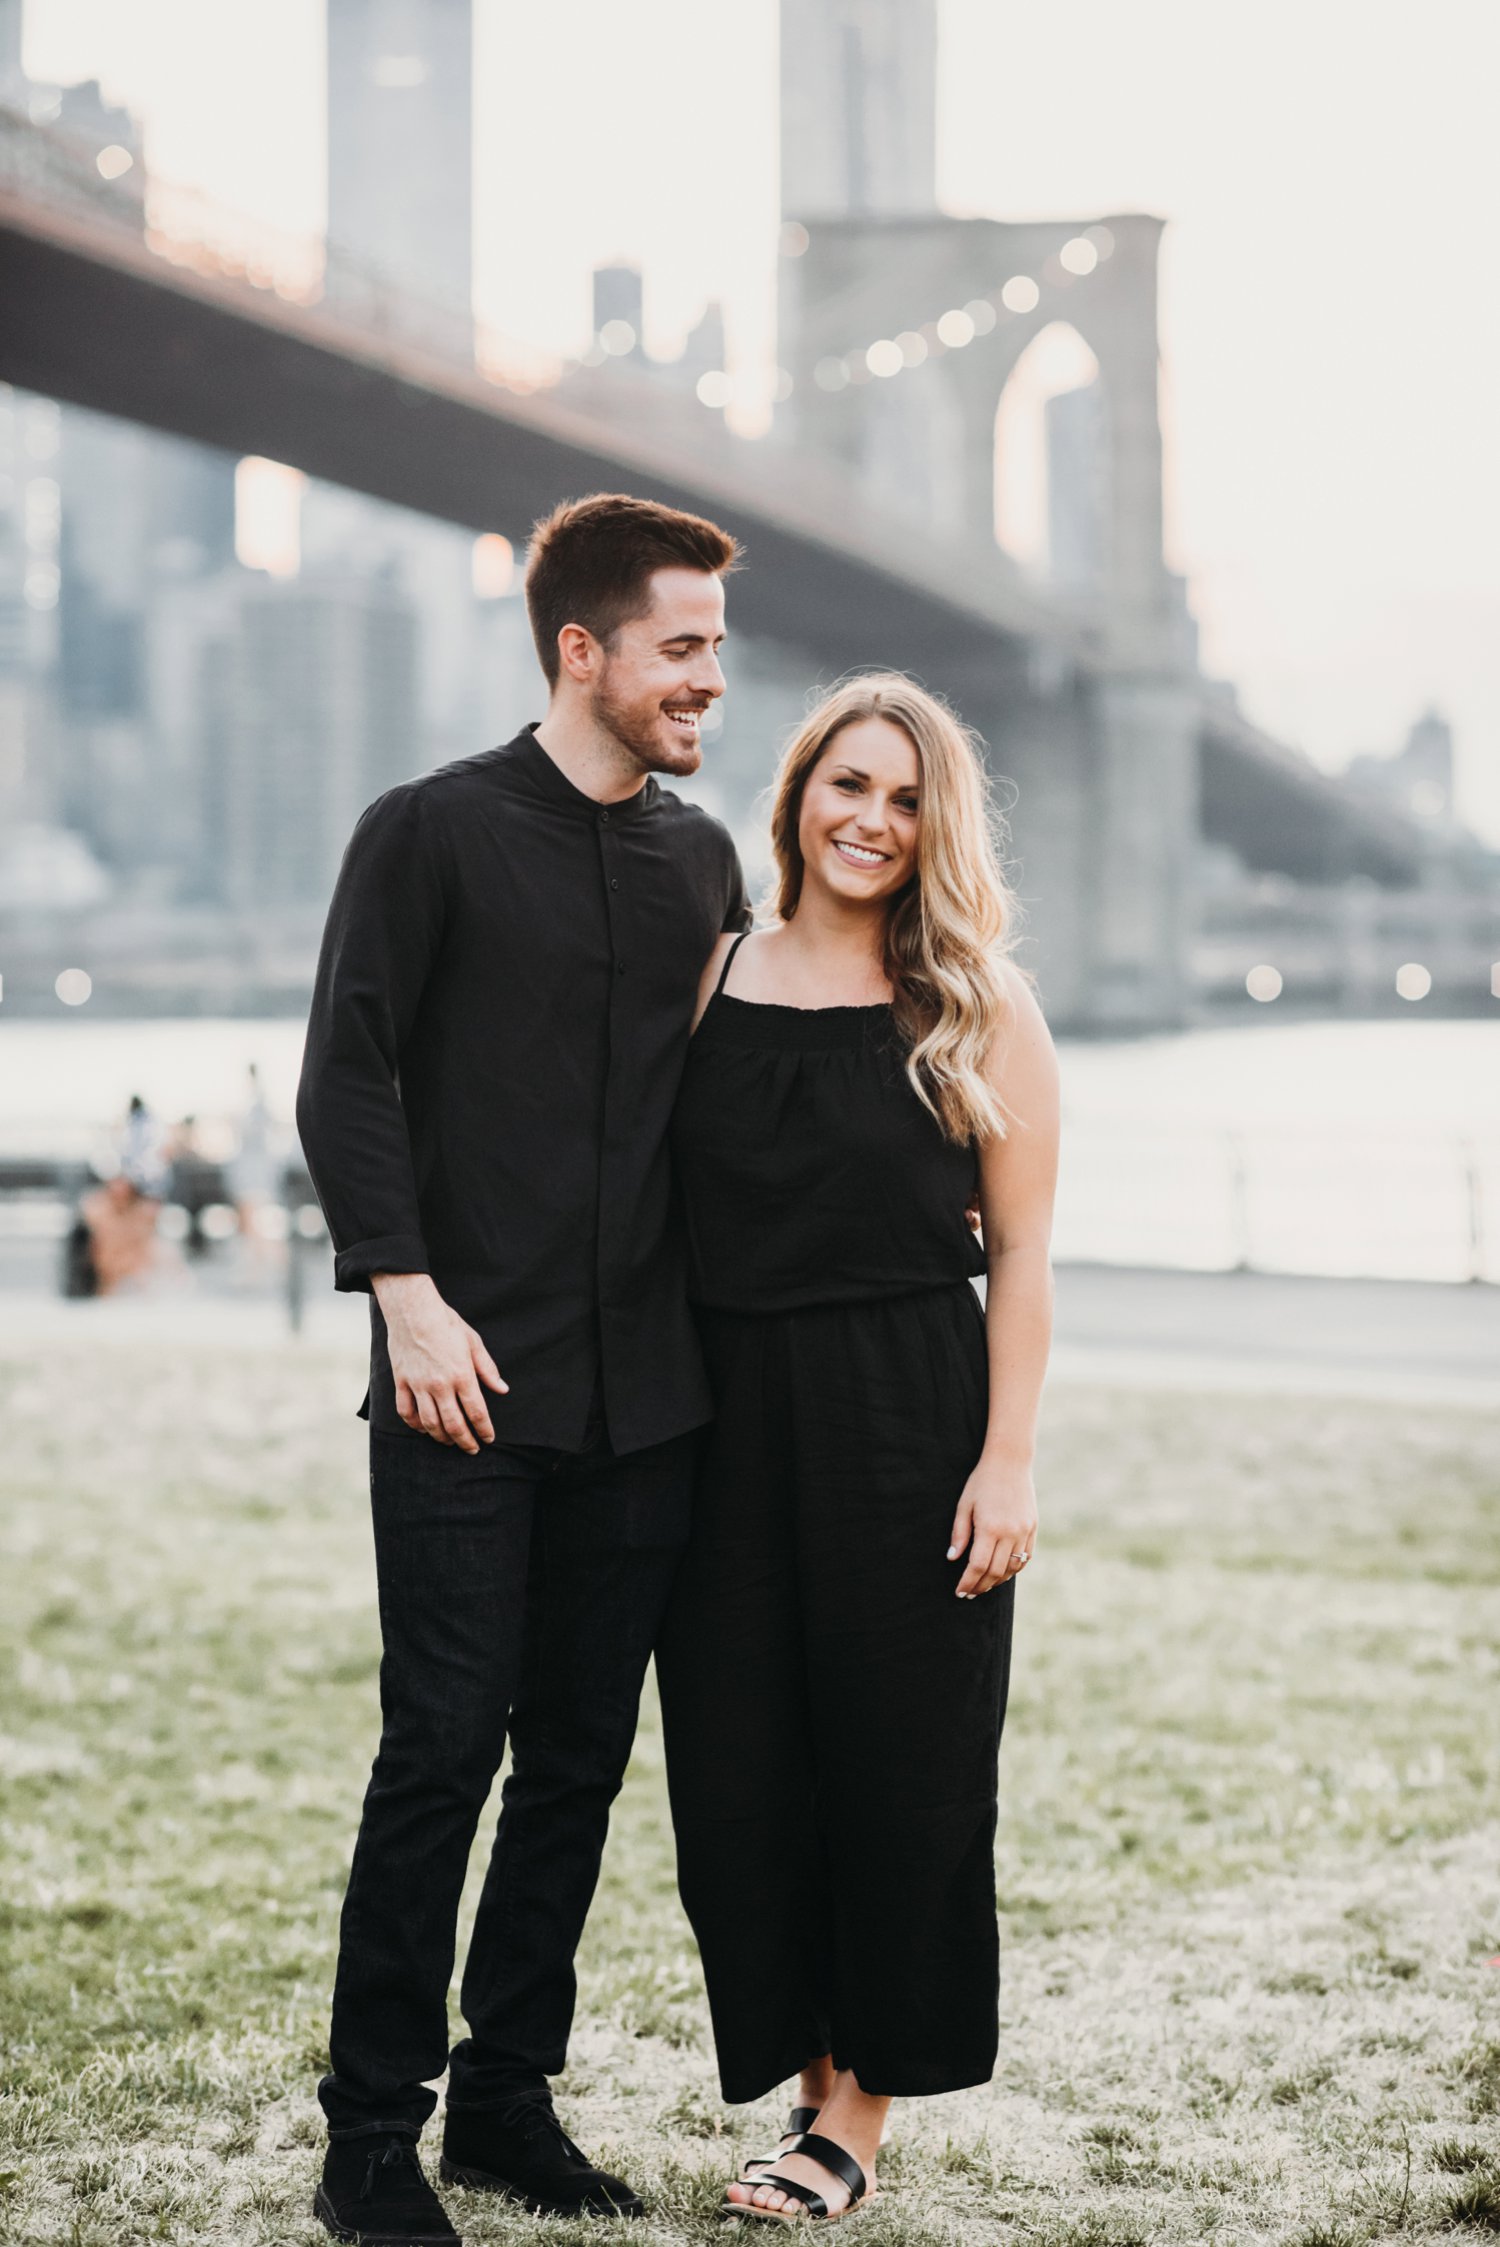  images by feliciathephotographer.com | destination wedding photographer | new york city | brooklyn bridge | proposal | engagement | whimsical | romantic | true love | she said yes | casual | 